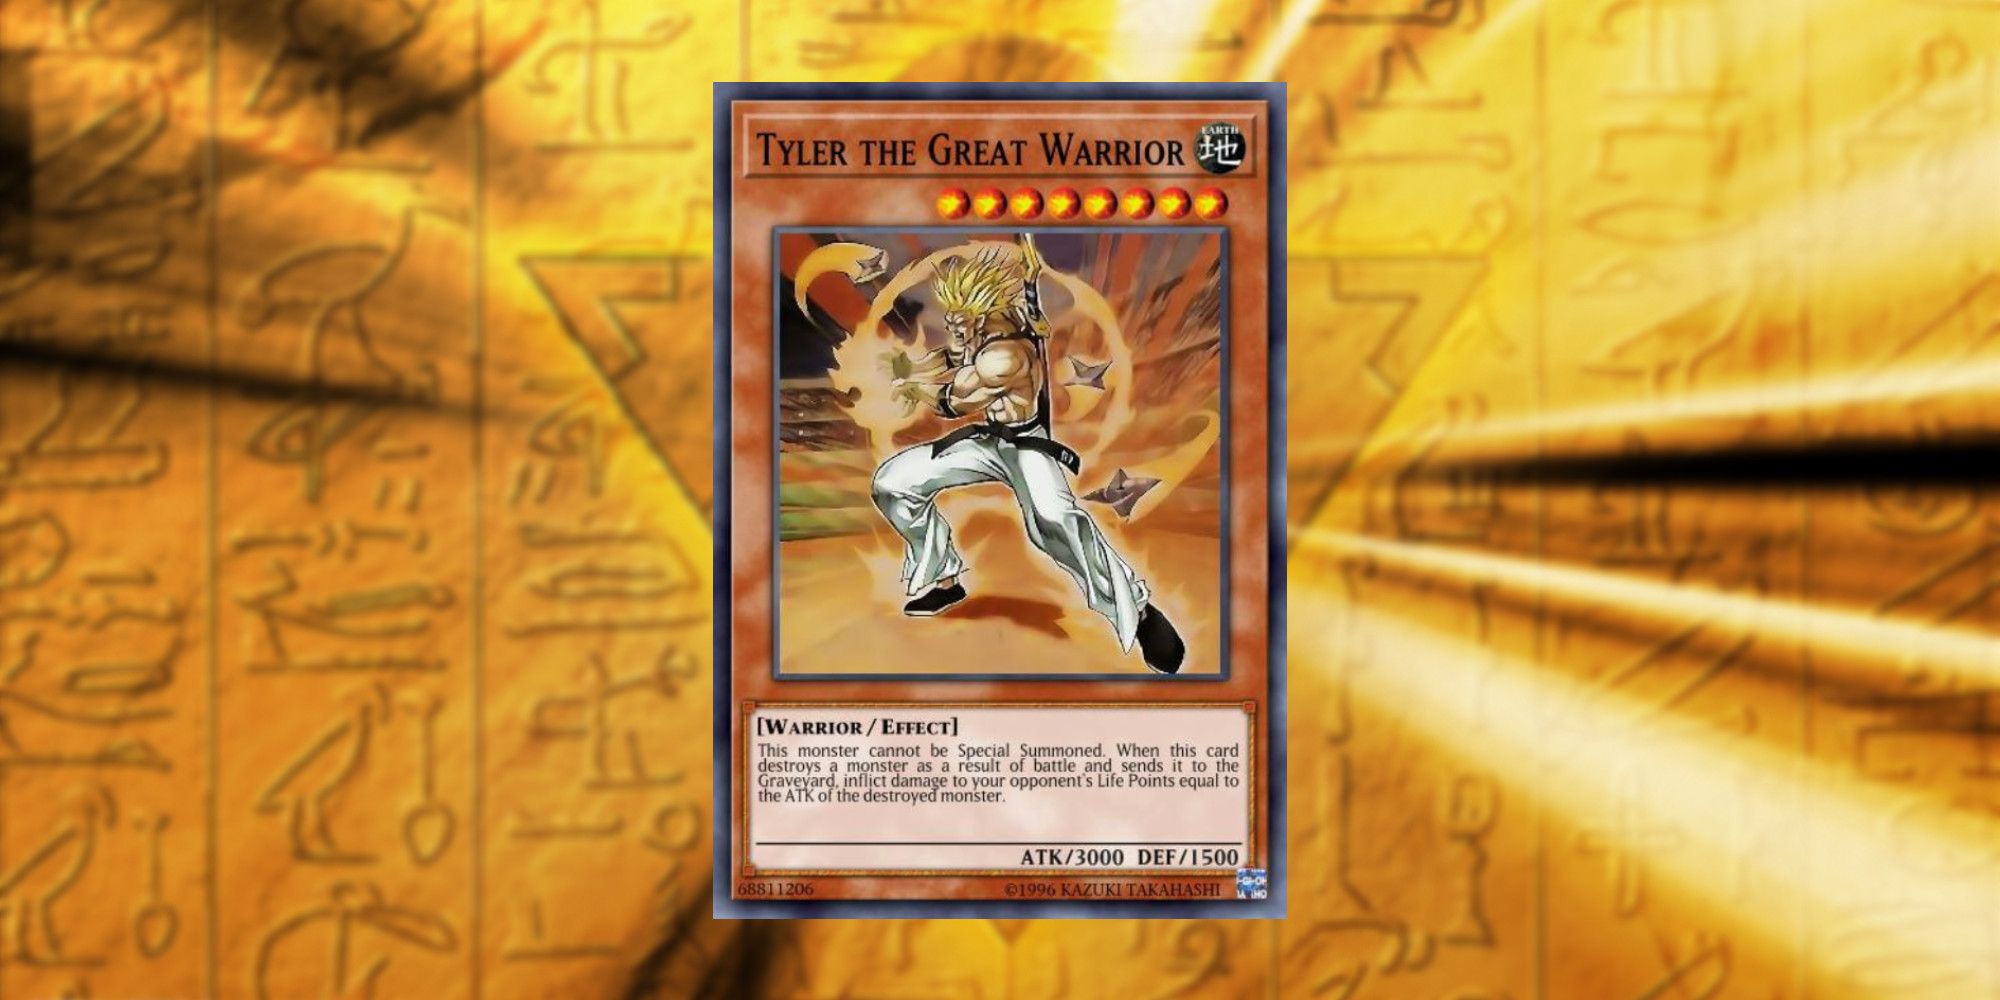 Rare Yu-Gi-Oh! Card Sells For Record-Breaking 0,000 At Auction